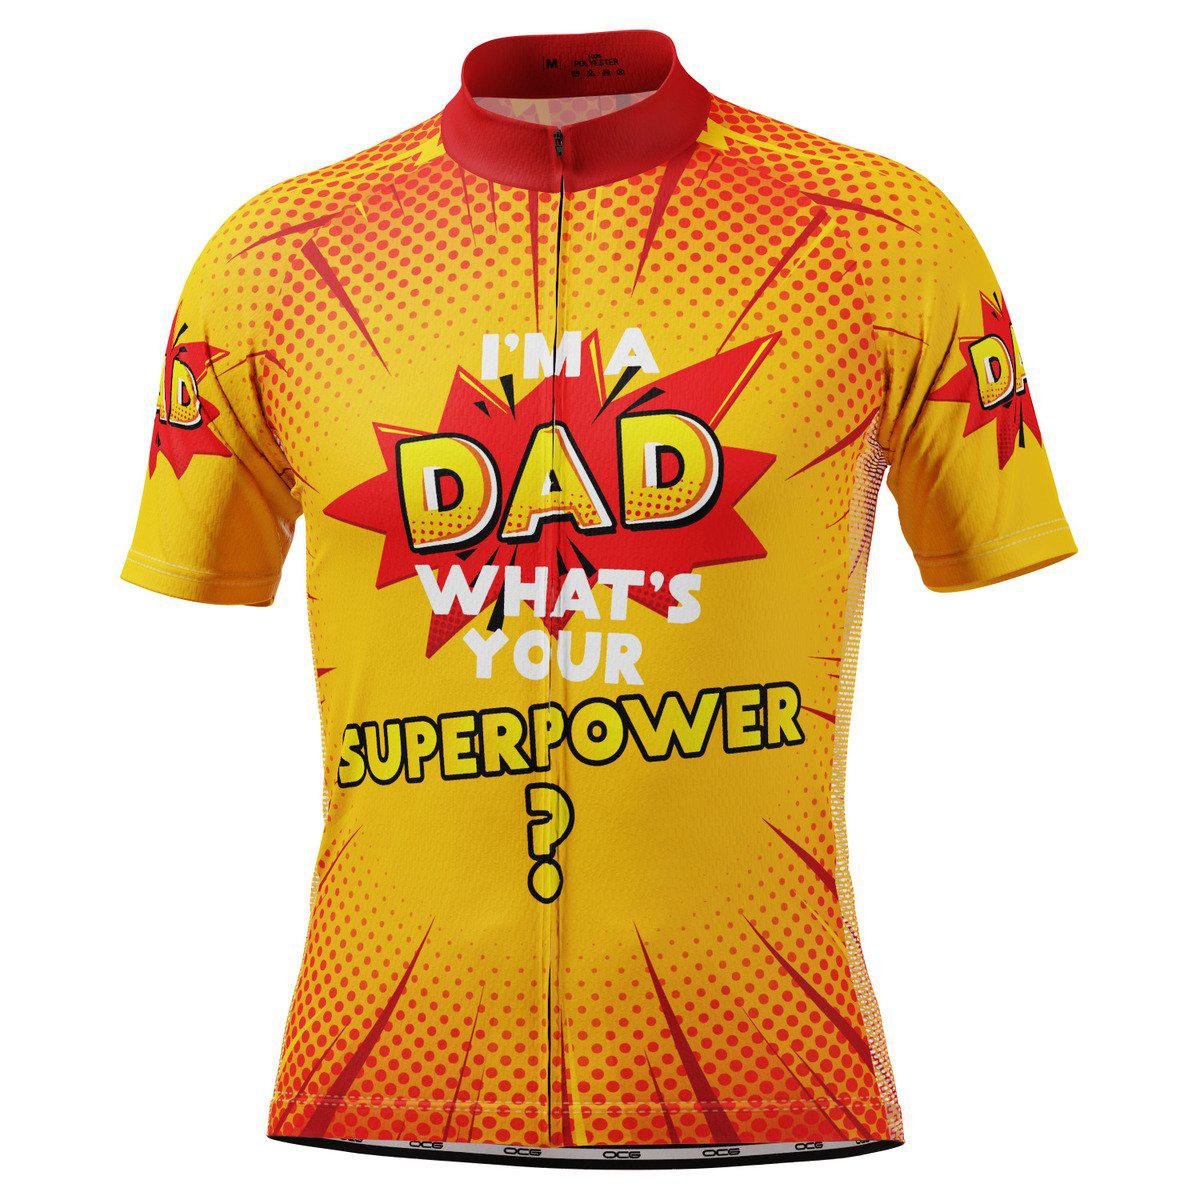 Men's Dad Superpowers Short Sleeve Cycling Jersey